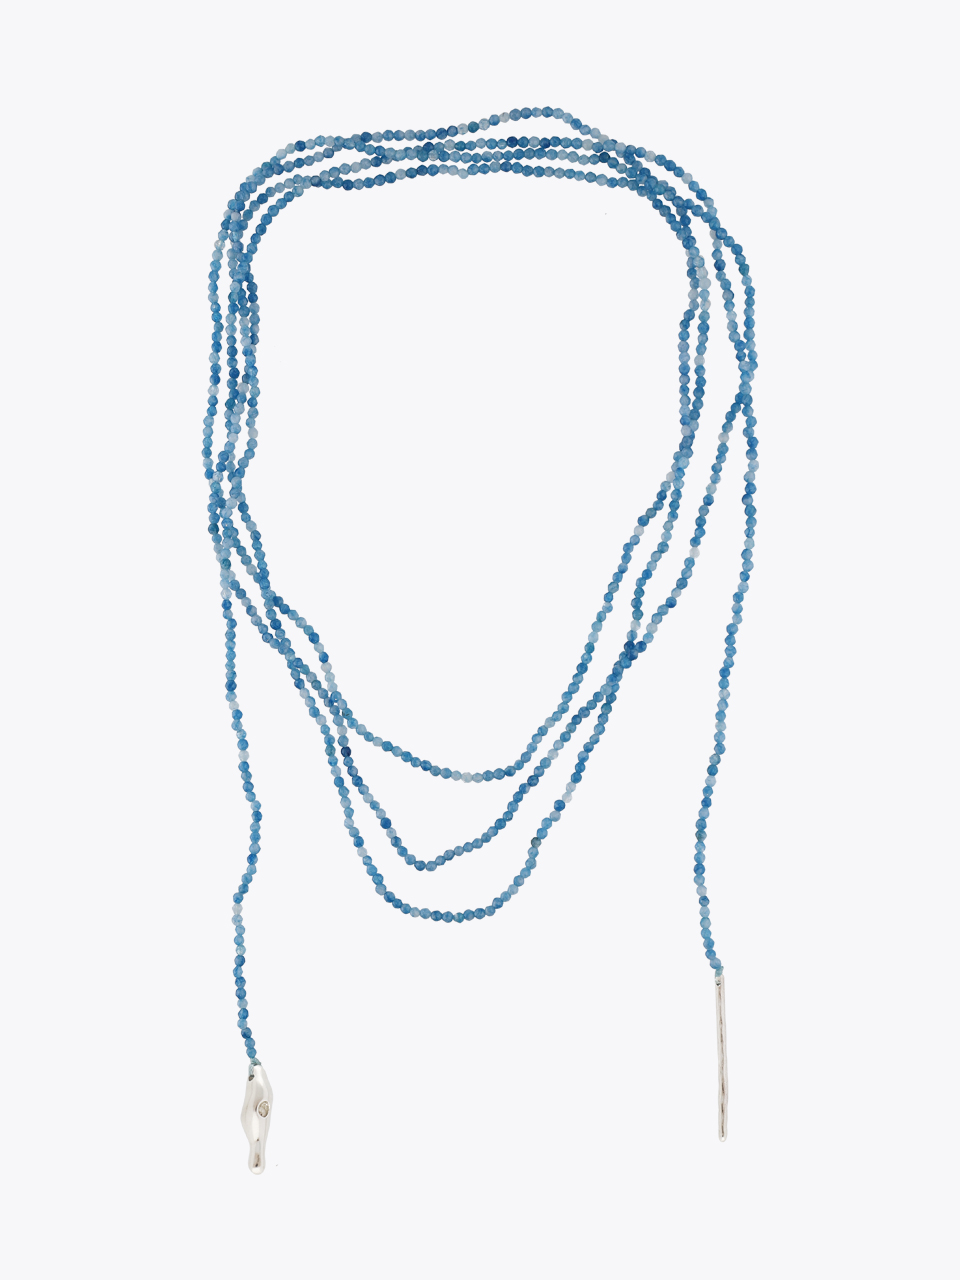 Stone scarf necklace - Blue